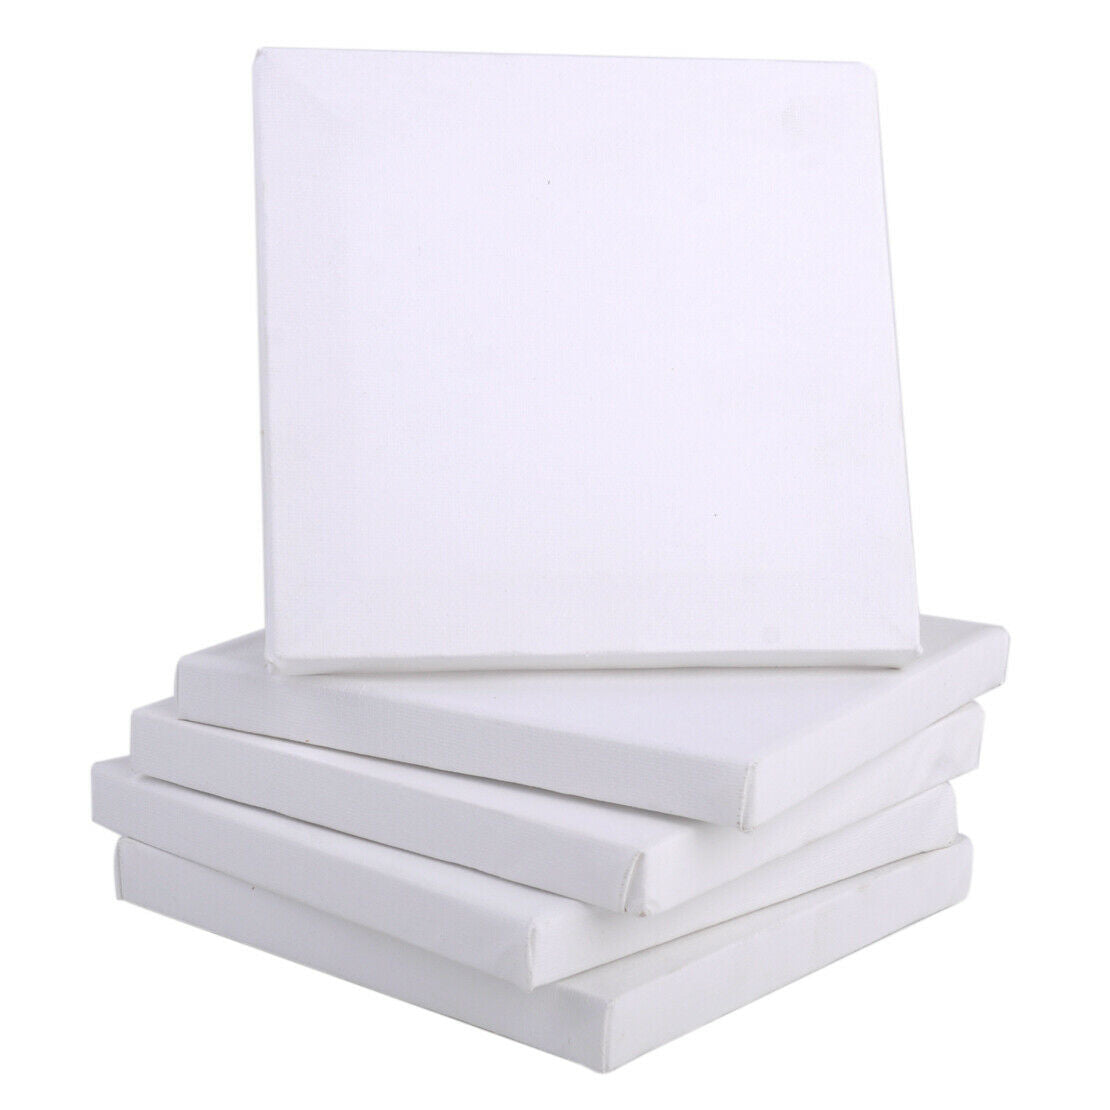 5pcs Square Stretched Blank Canvas Art Board Acrylic Oil Paint Craft 15x15cm An